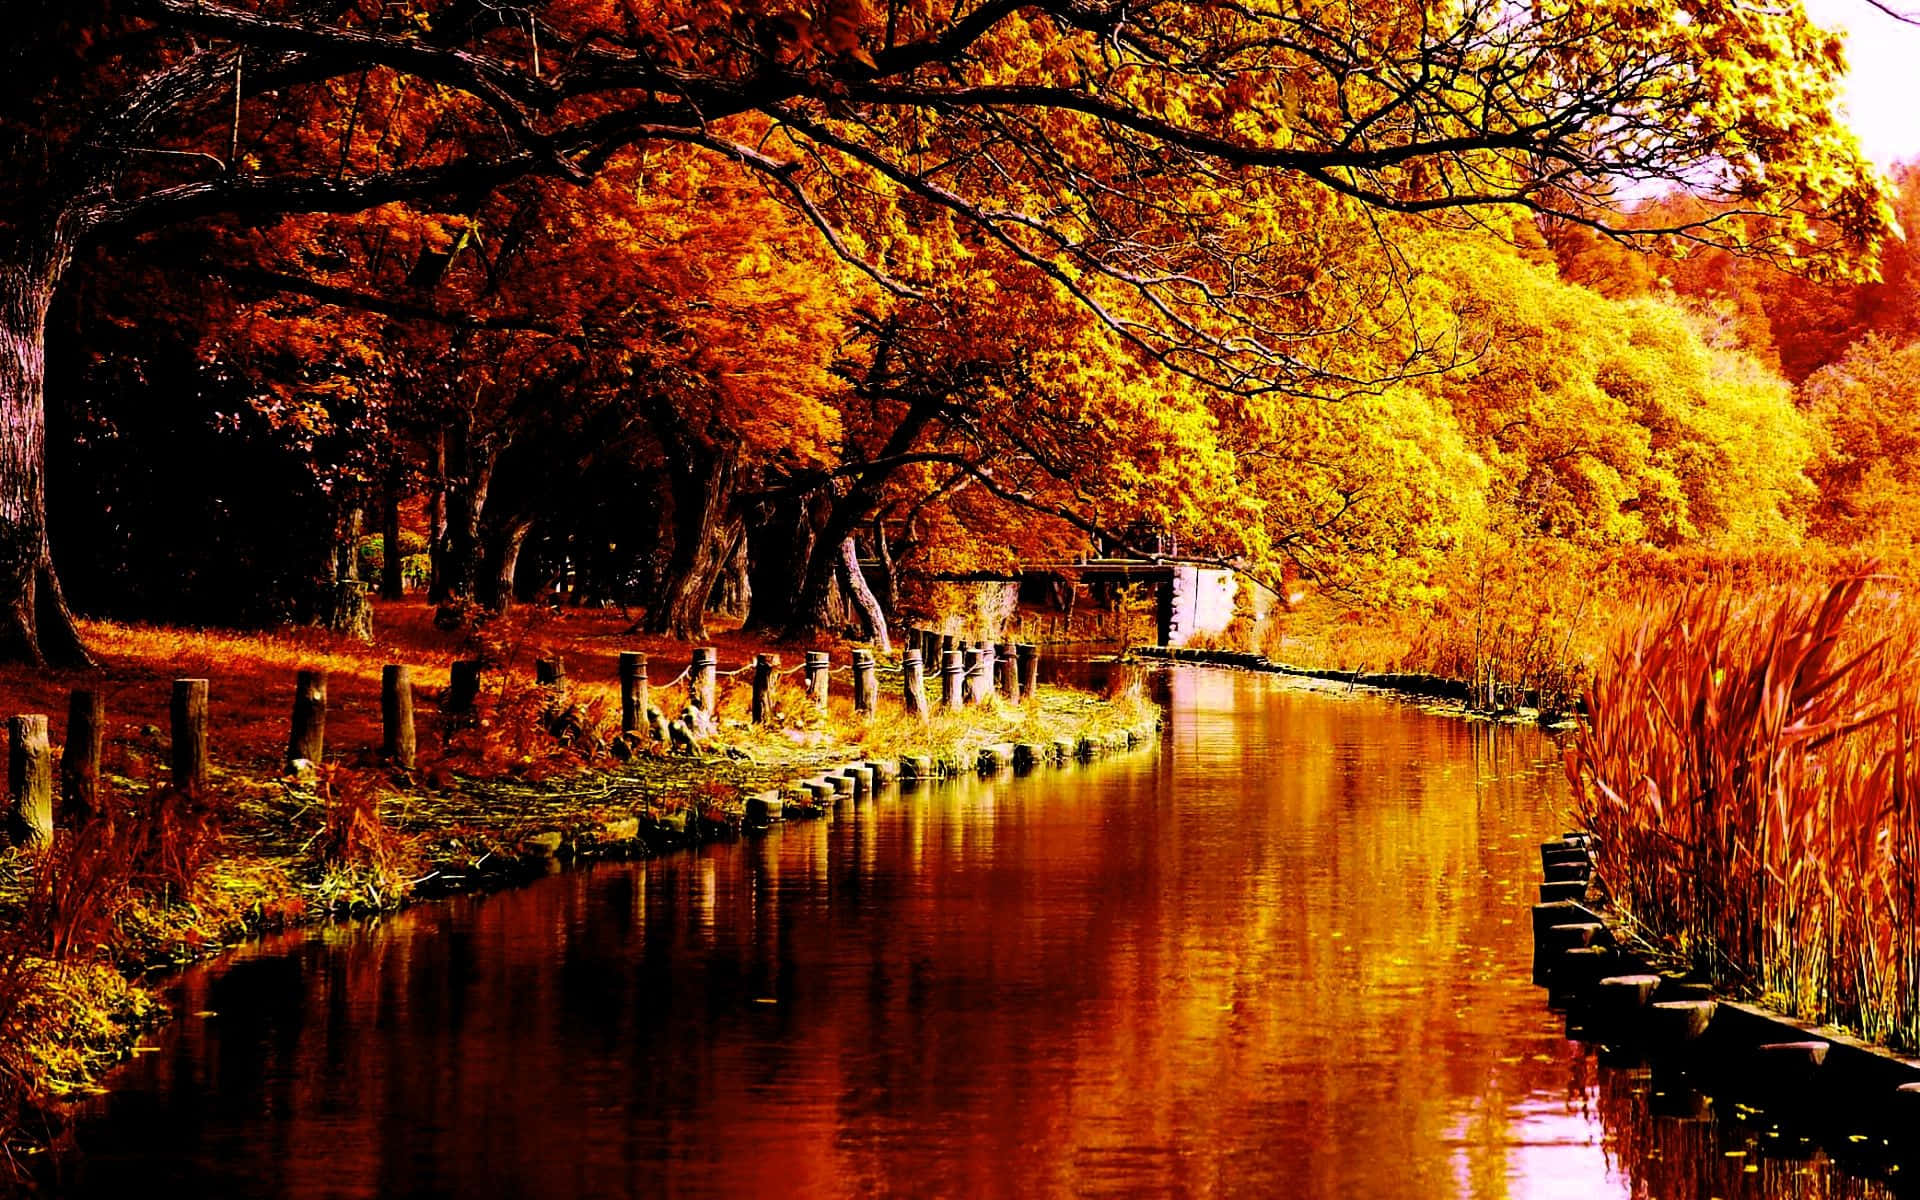 "Celebrate the beauty and colors of autumn with this stunning desktop wallpaper." Wallpaper